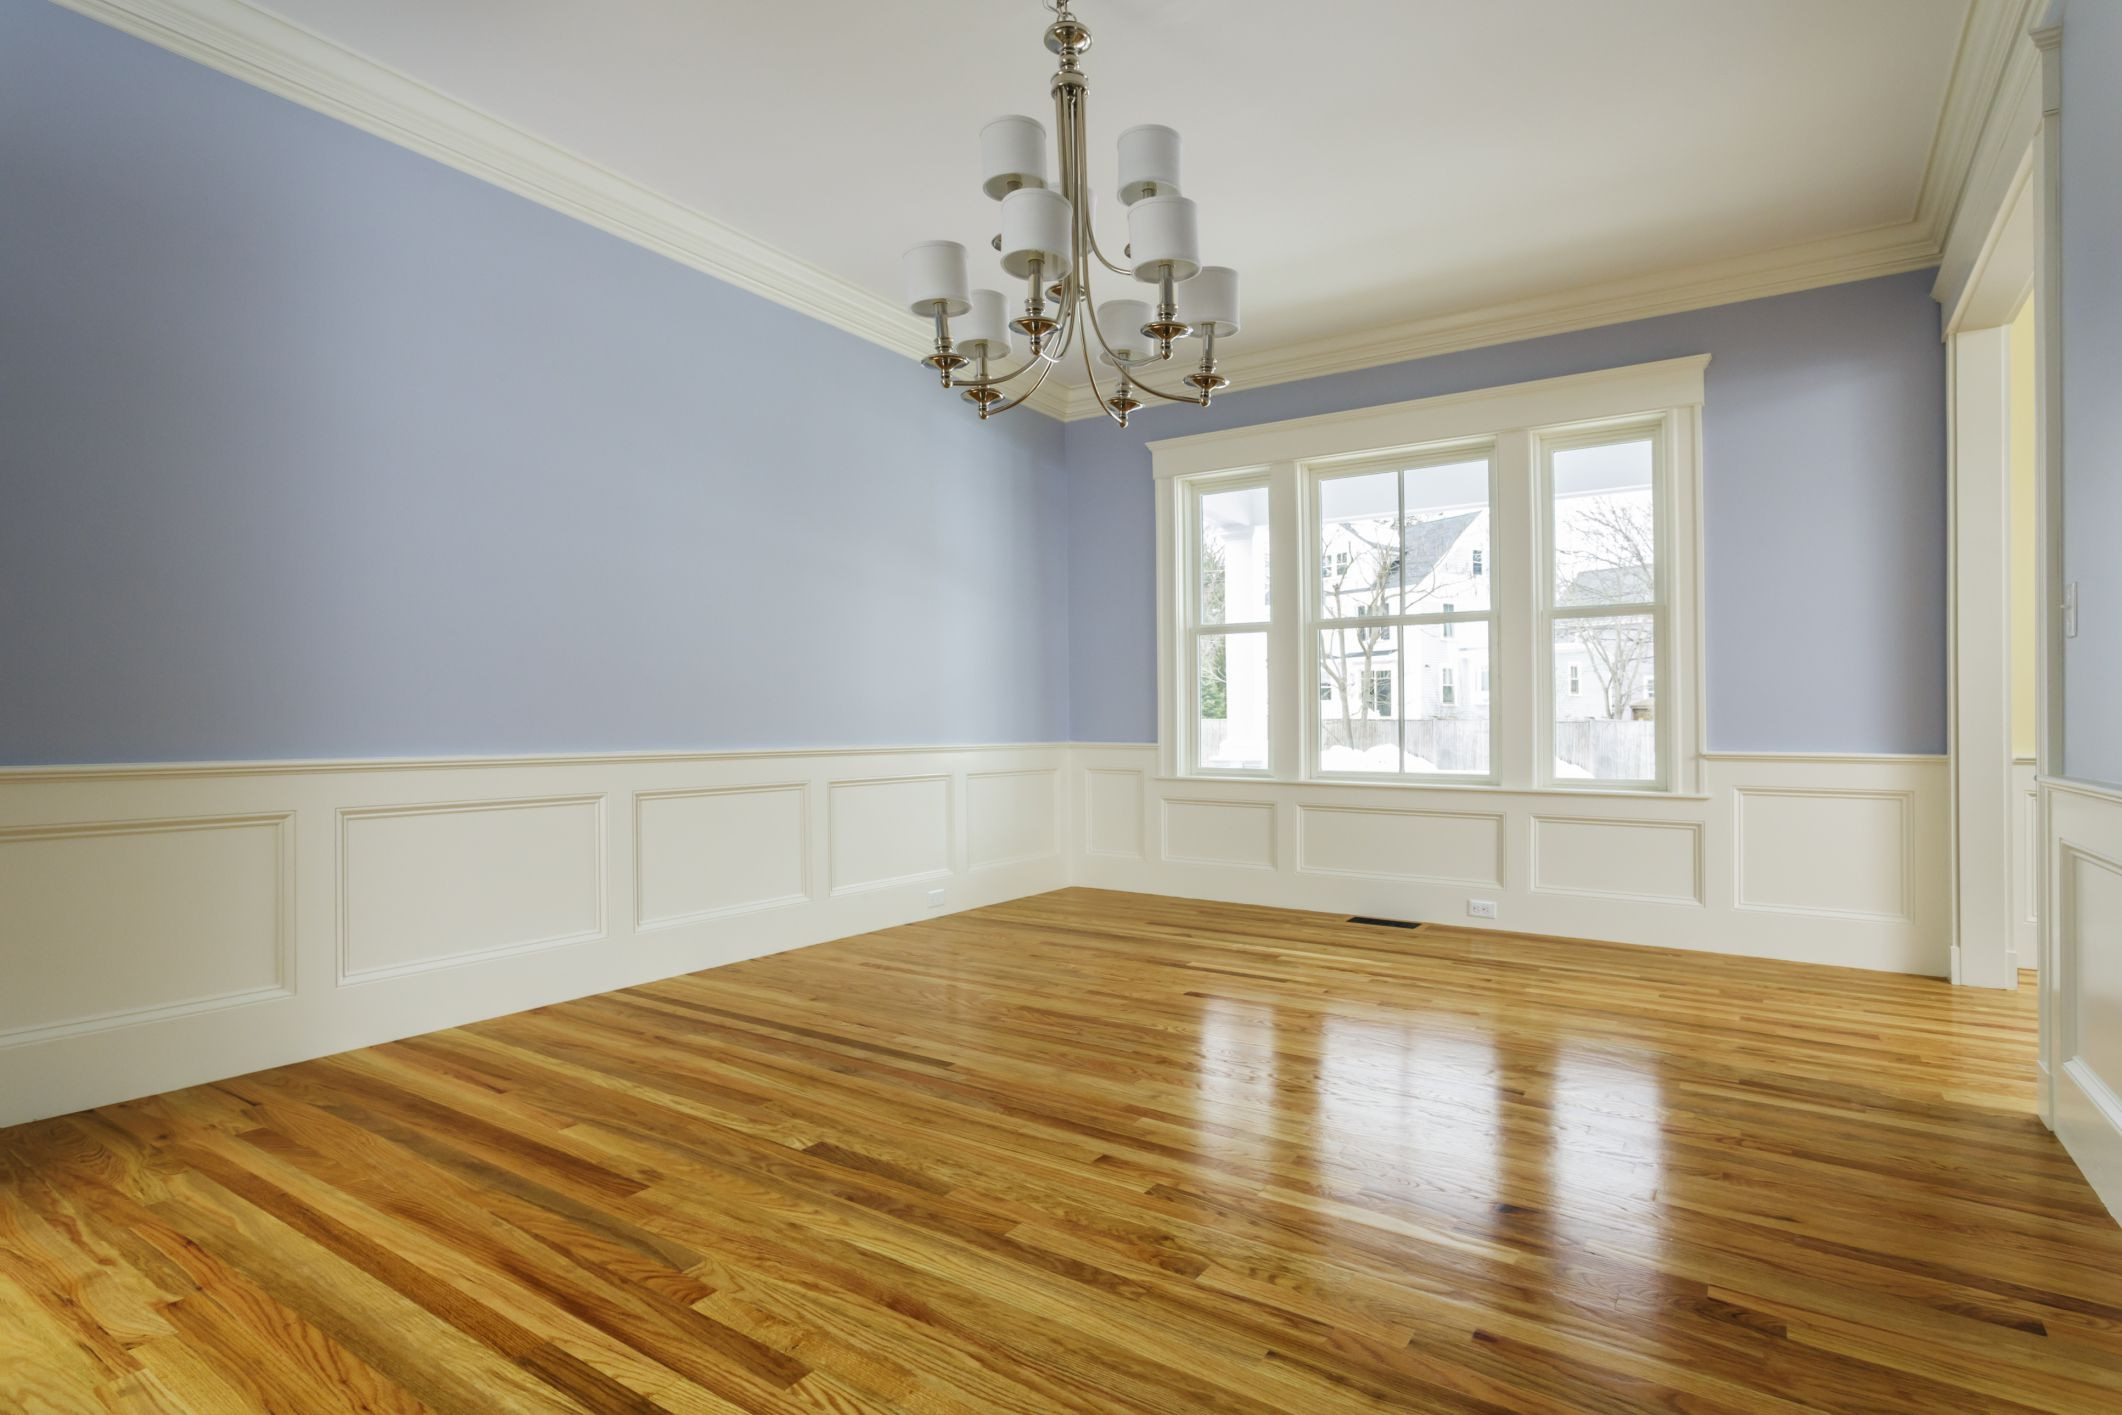 17 Elegant Hardwood Floor Cleaning Services Chicago 2024 free download hardwood floor cleaning services chicago of the cost to refinish hardwood floors with regard to 168686572 highres 56a2fd773df78cf7727b6cb3